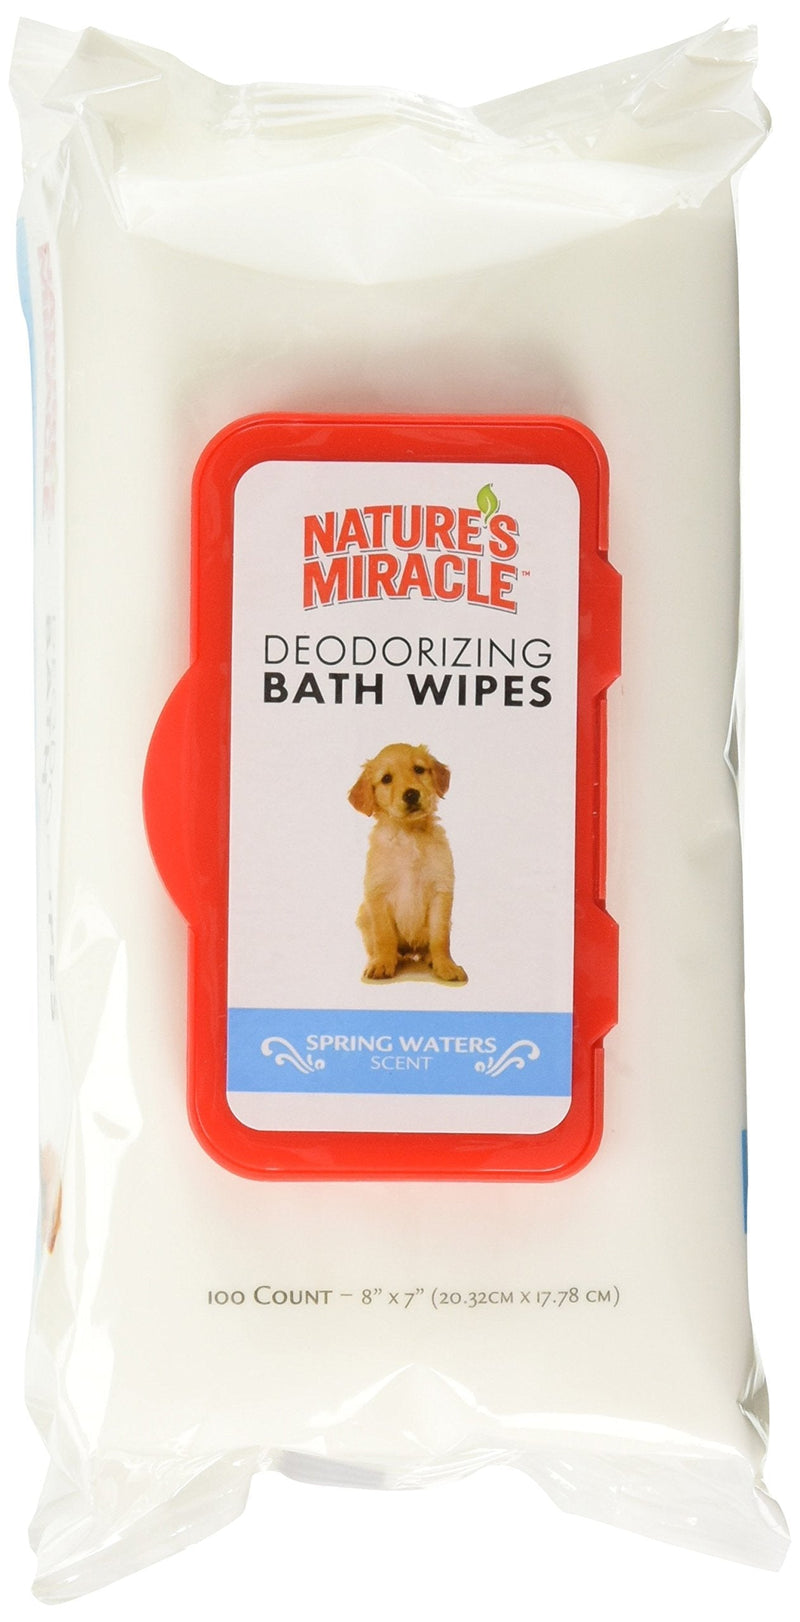 [Australia] - Nature's Miracle Deodorizing Bath Wipes - Spring Waters Scent - (2 Packs of 100 Count) 